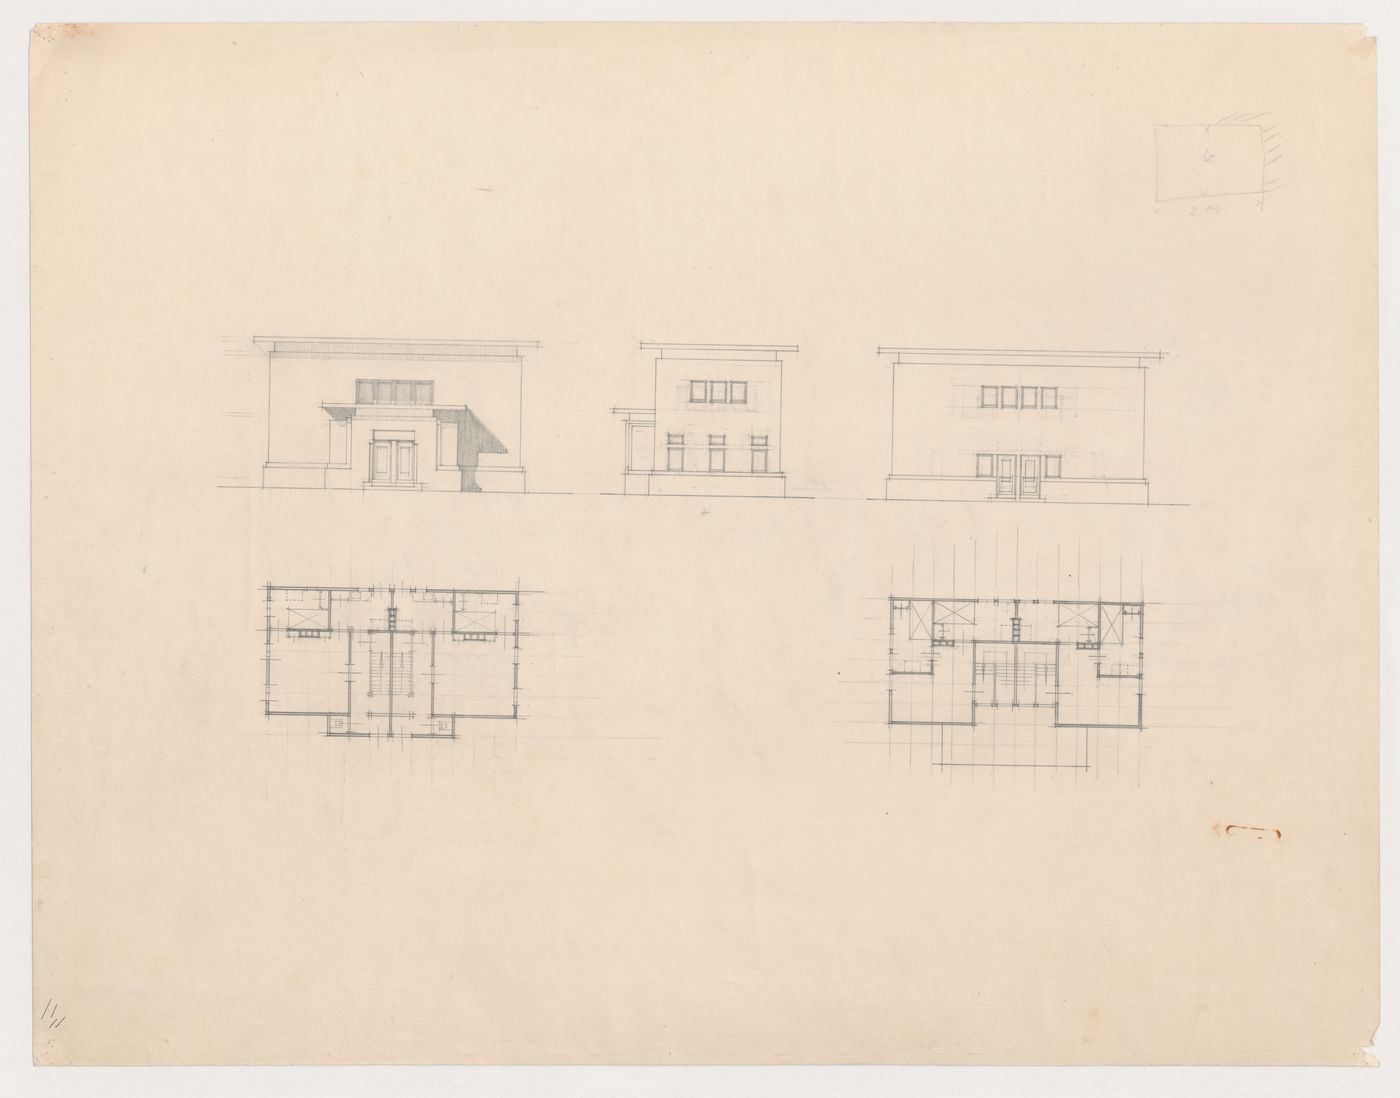 Elevations and plans for a double worker's dwelling in reinforced concrete, Rotterdam, Netherlands